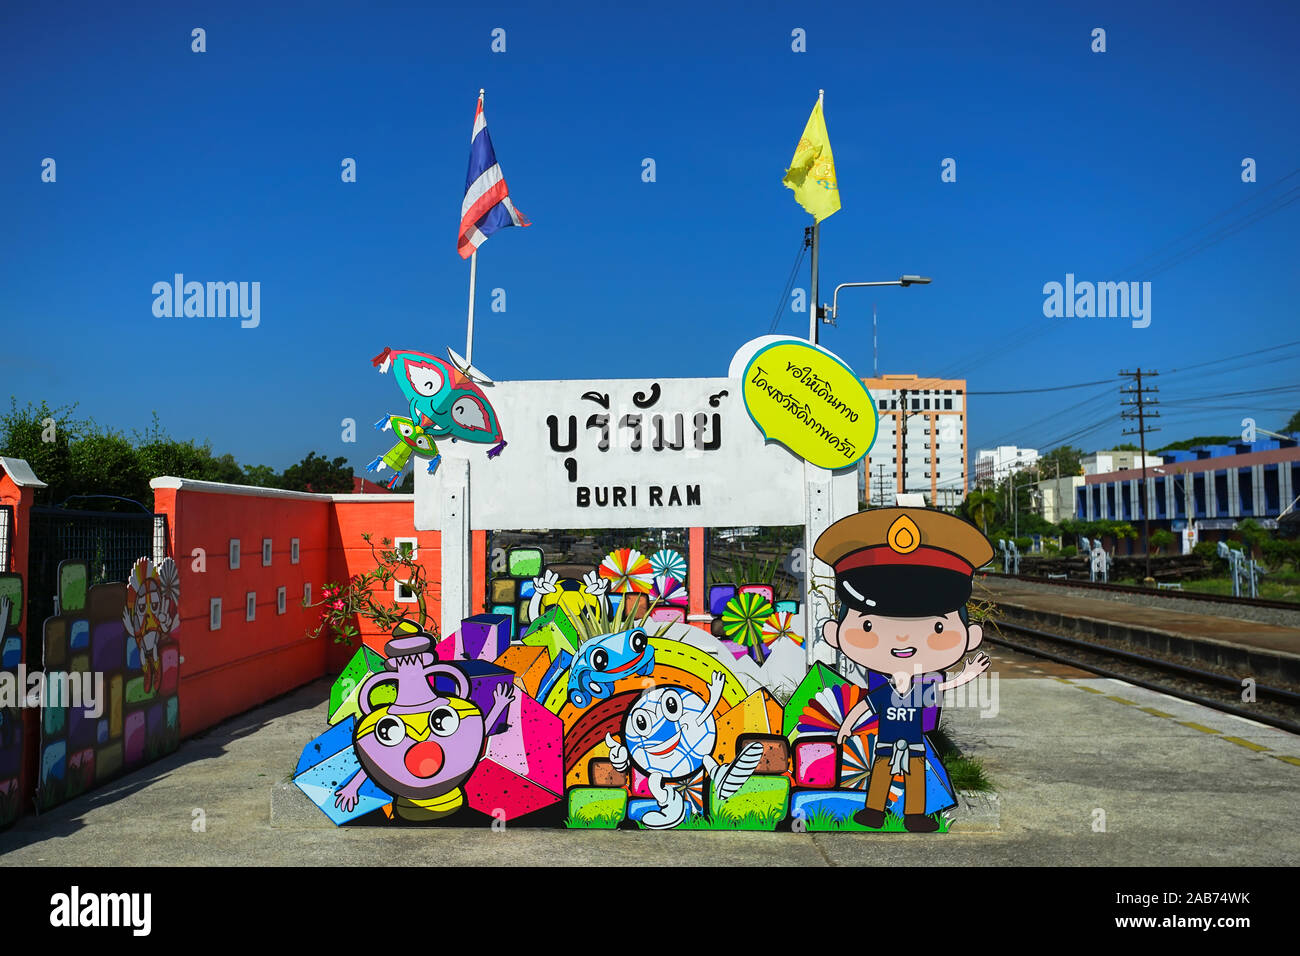 Colorful board for travel promoted in Buri Ram train station, Thailand. (Translation:Buri Ram and Bon Voyage in yellow textbox) Stock Photo